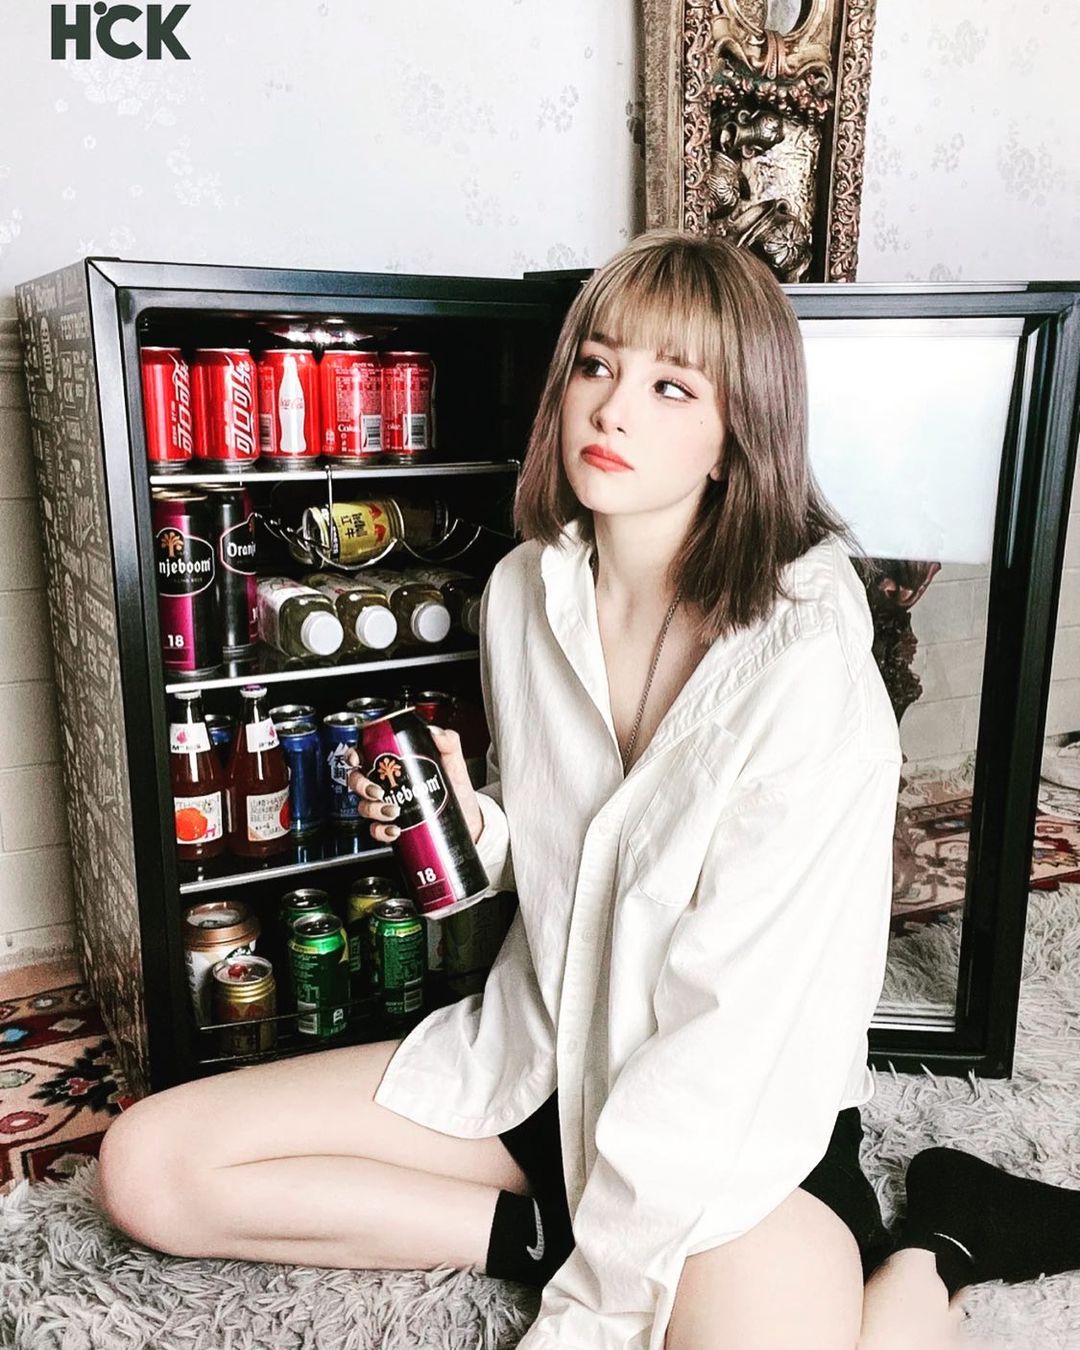 Beverage Refrigerator Has Become A Fashion Furniture